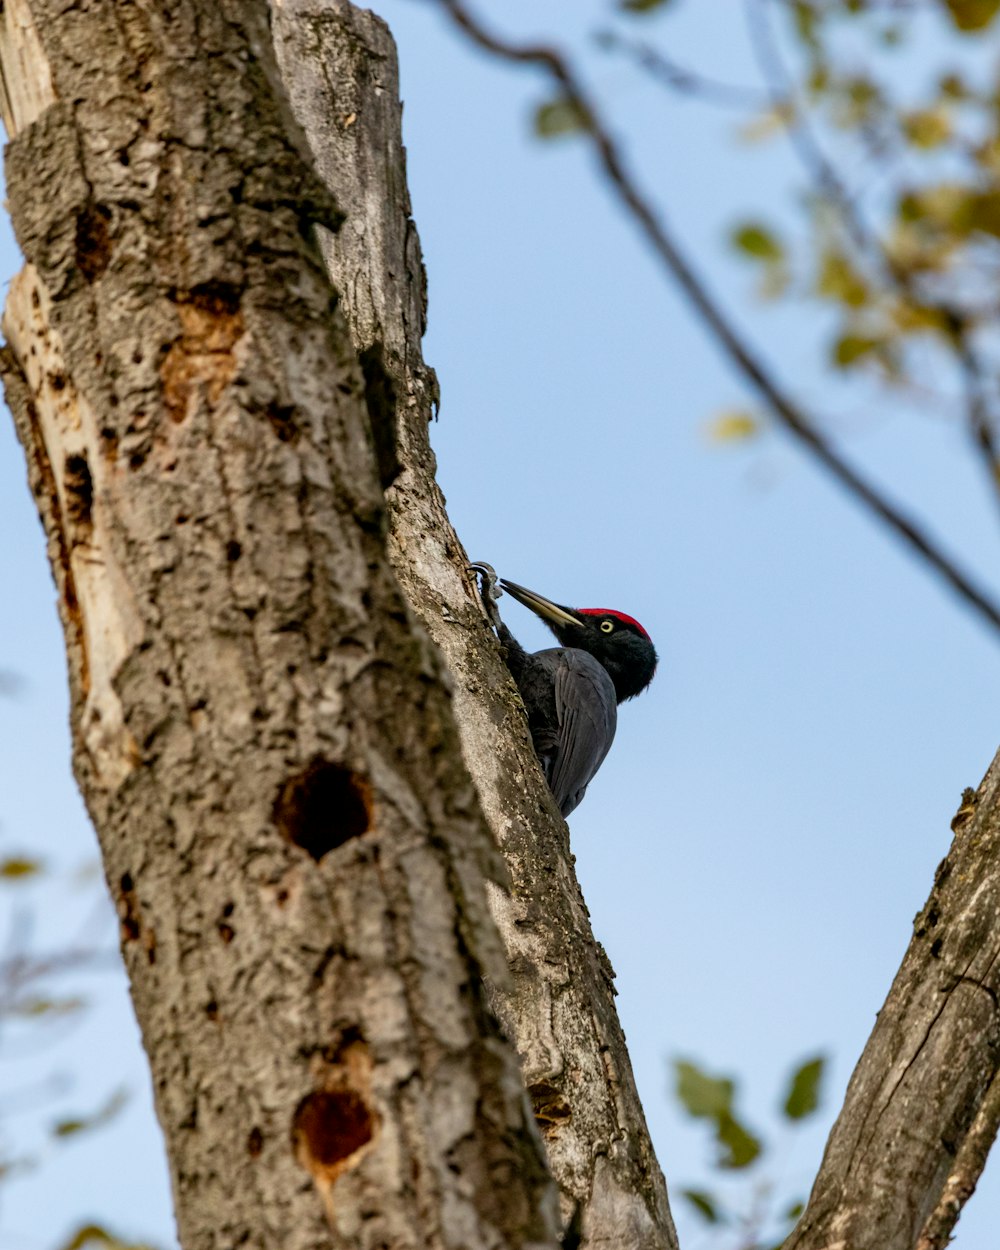 a woodpecker in a tree with a blue sky in the background